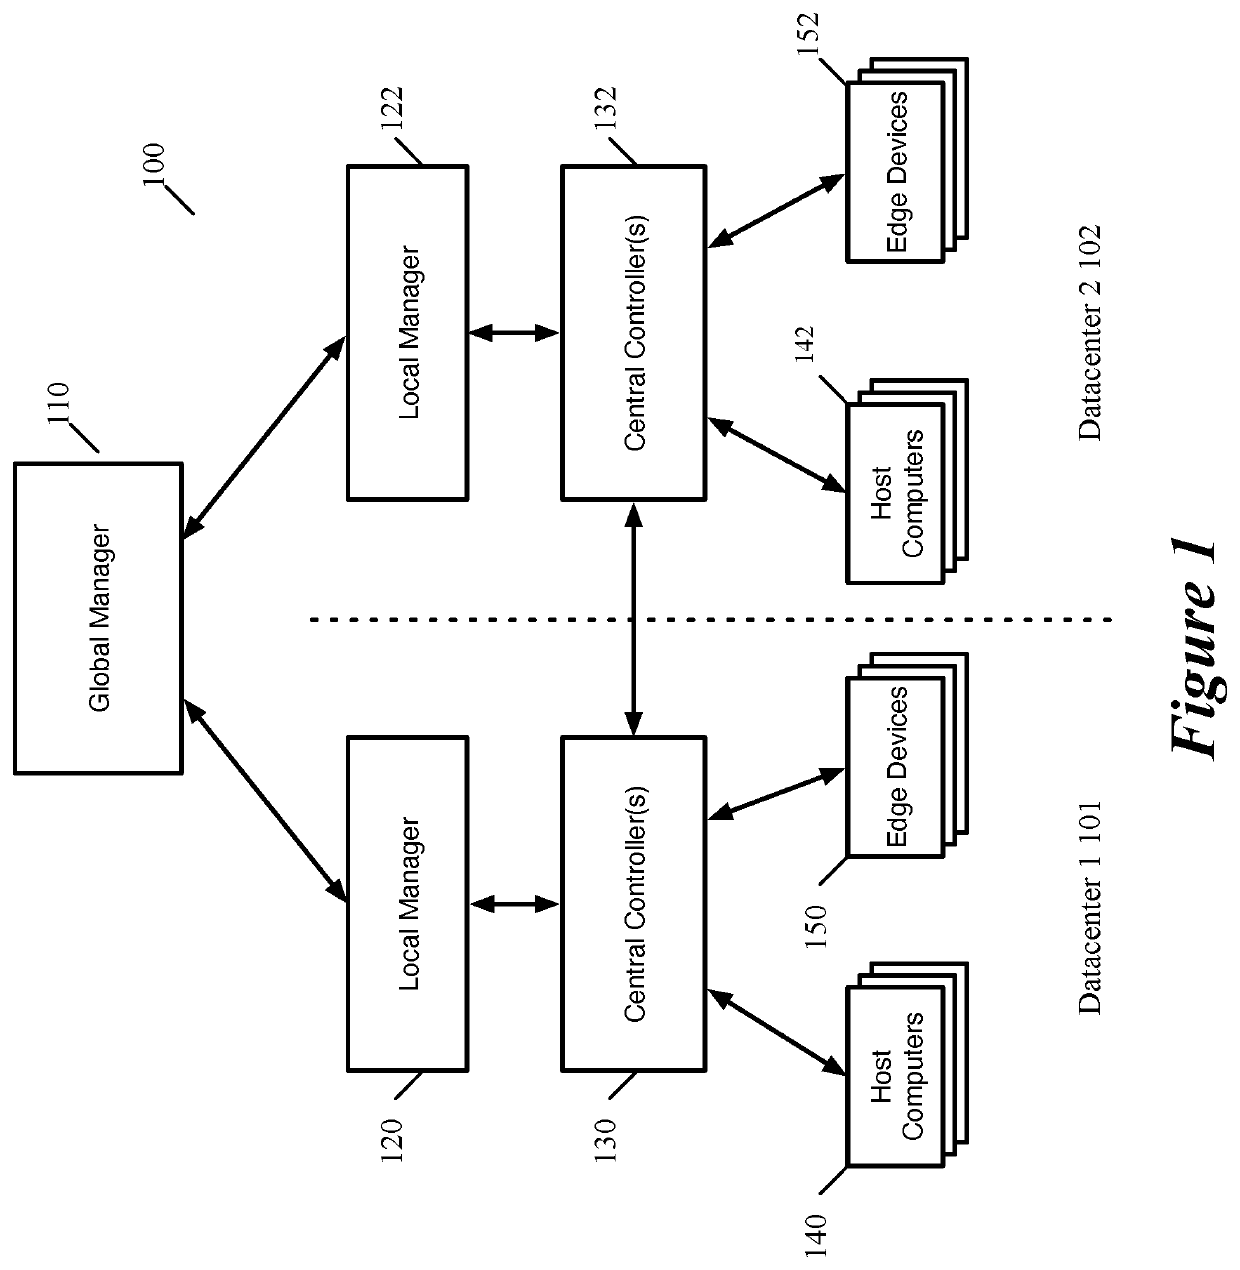 Synchronization of logical network state between global and local managers